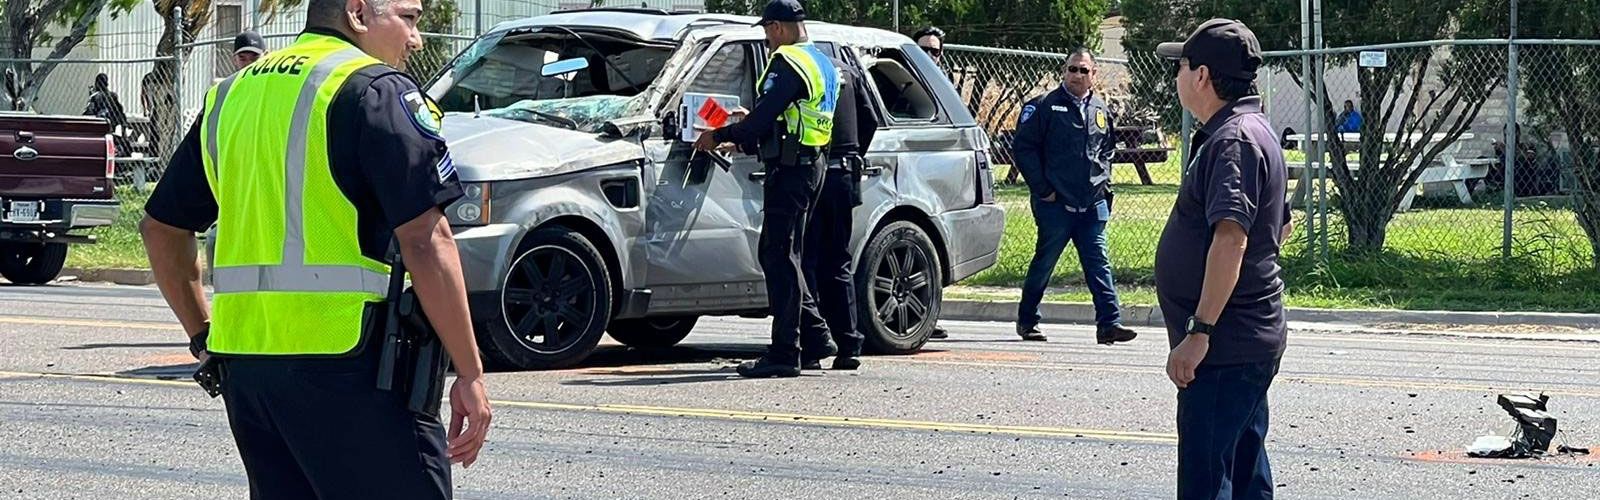 Death toll increases to 8 after car plows into a crowd in front of shelter  housing migrants | CNN